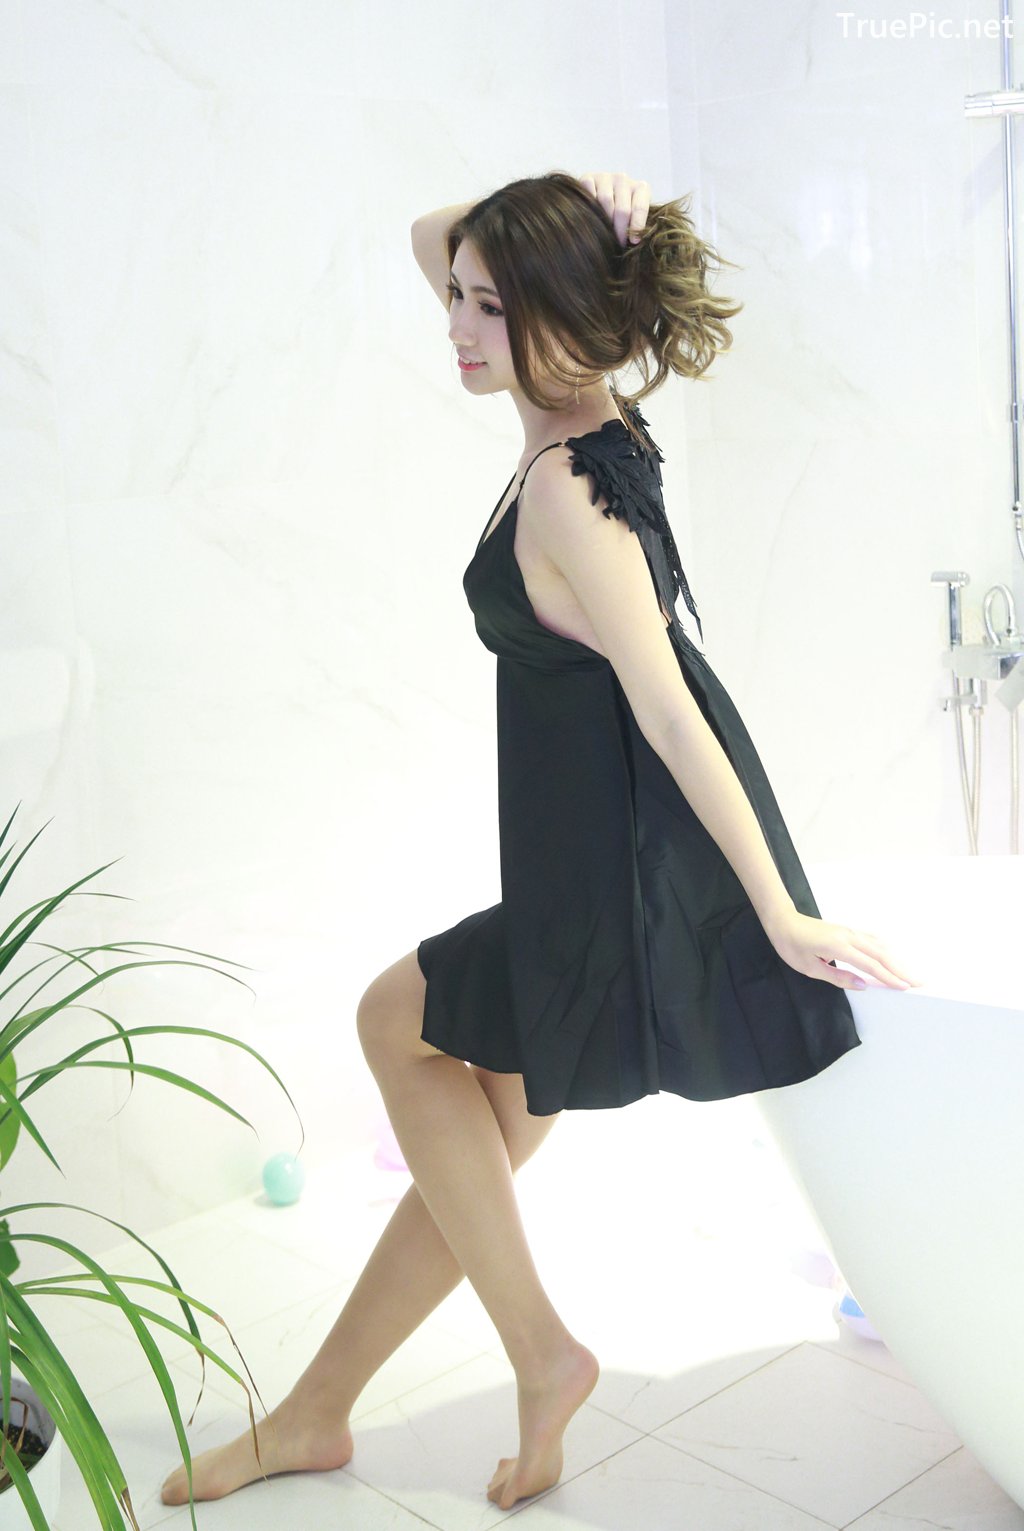 Image-Taiwanese-Model–張倫甄–Charming-Girl-With-Black-Sleep-Dress-TruePic.net- Picture-64